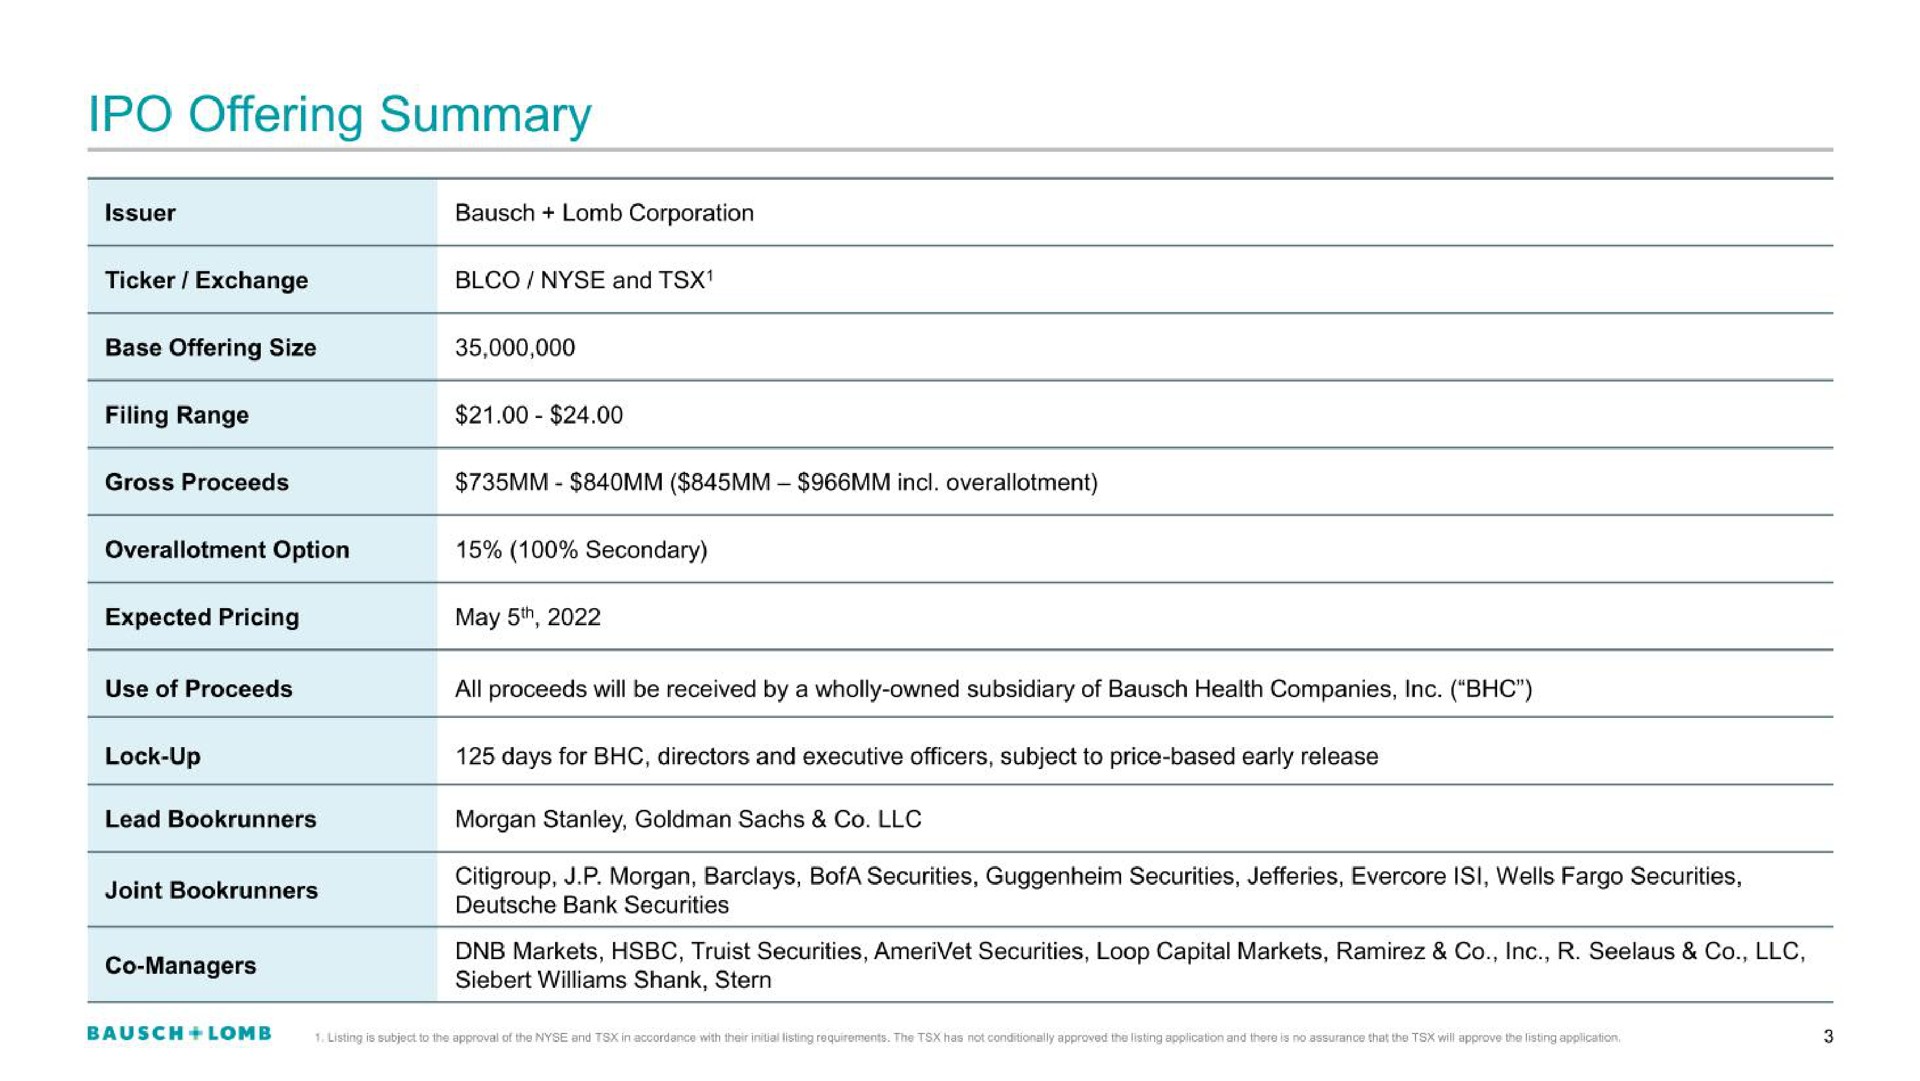 offering summary | Bausch+Lomb